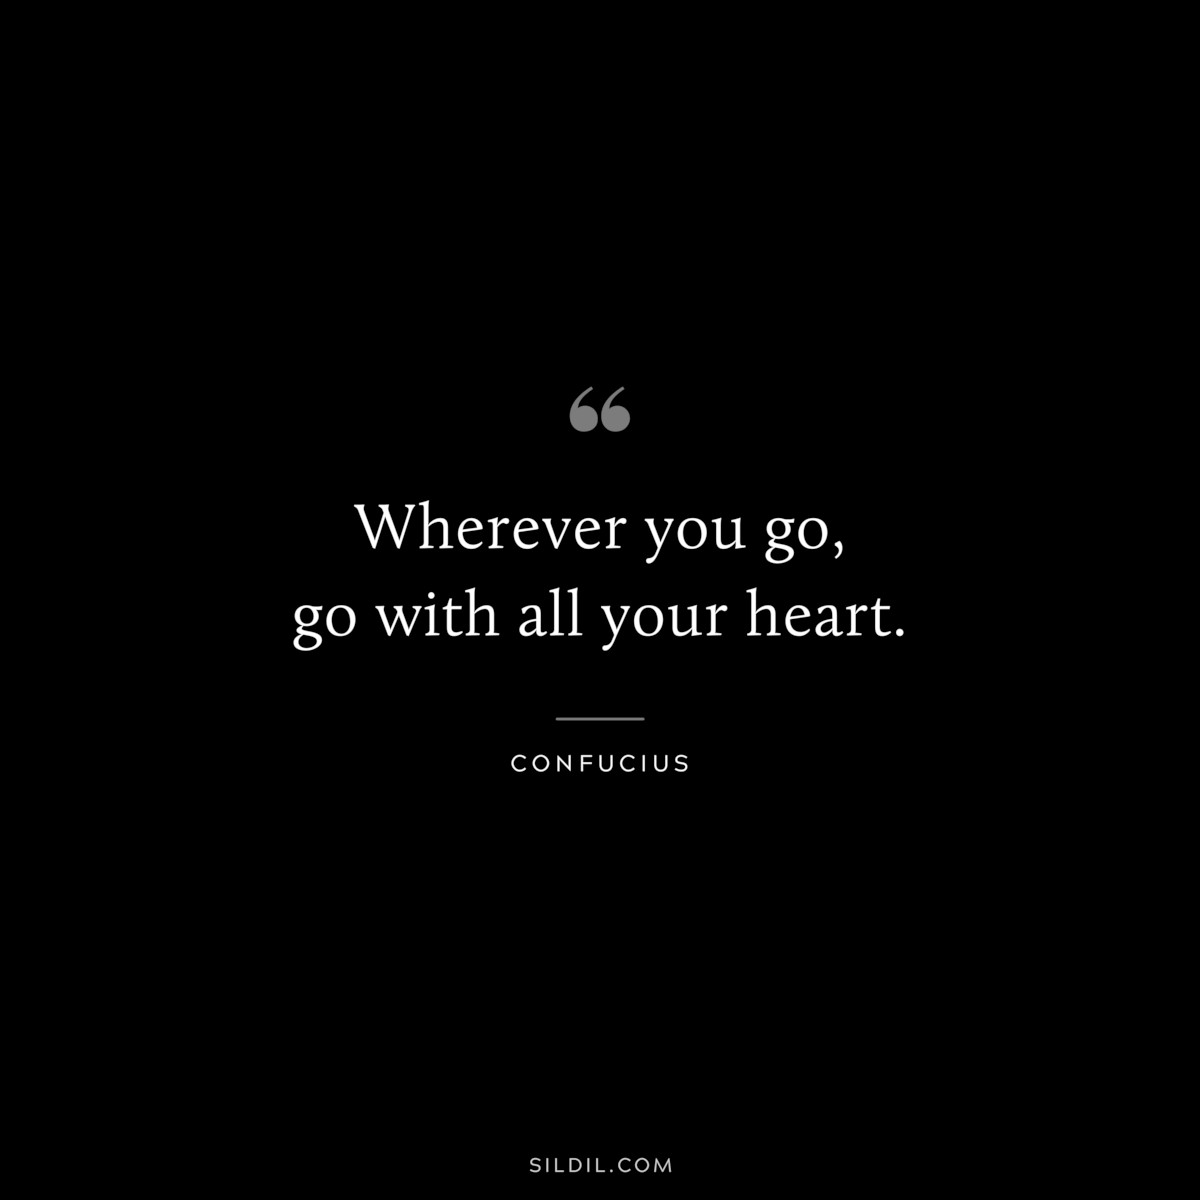 Wherever you go, go with all your heart. ― Confucius